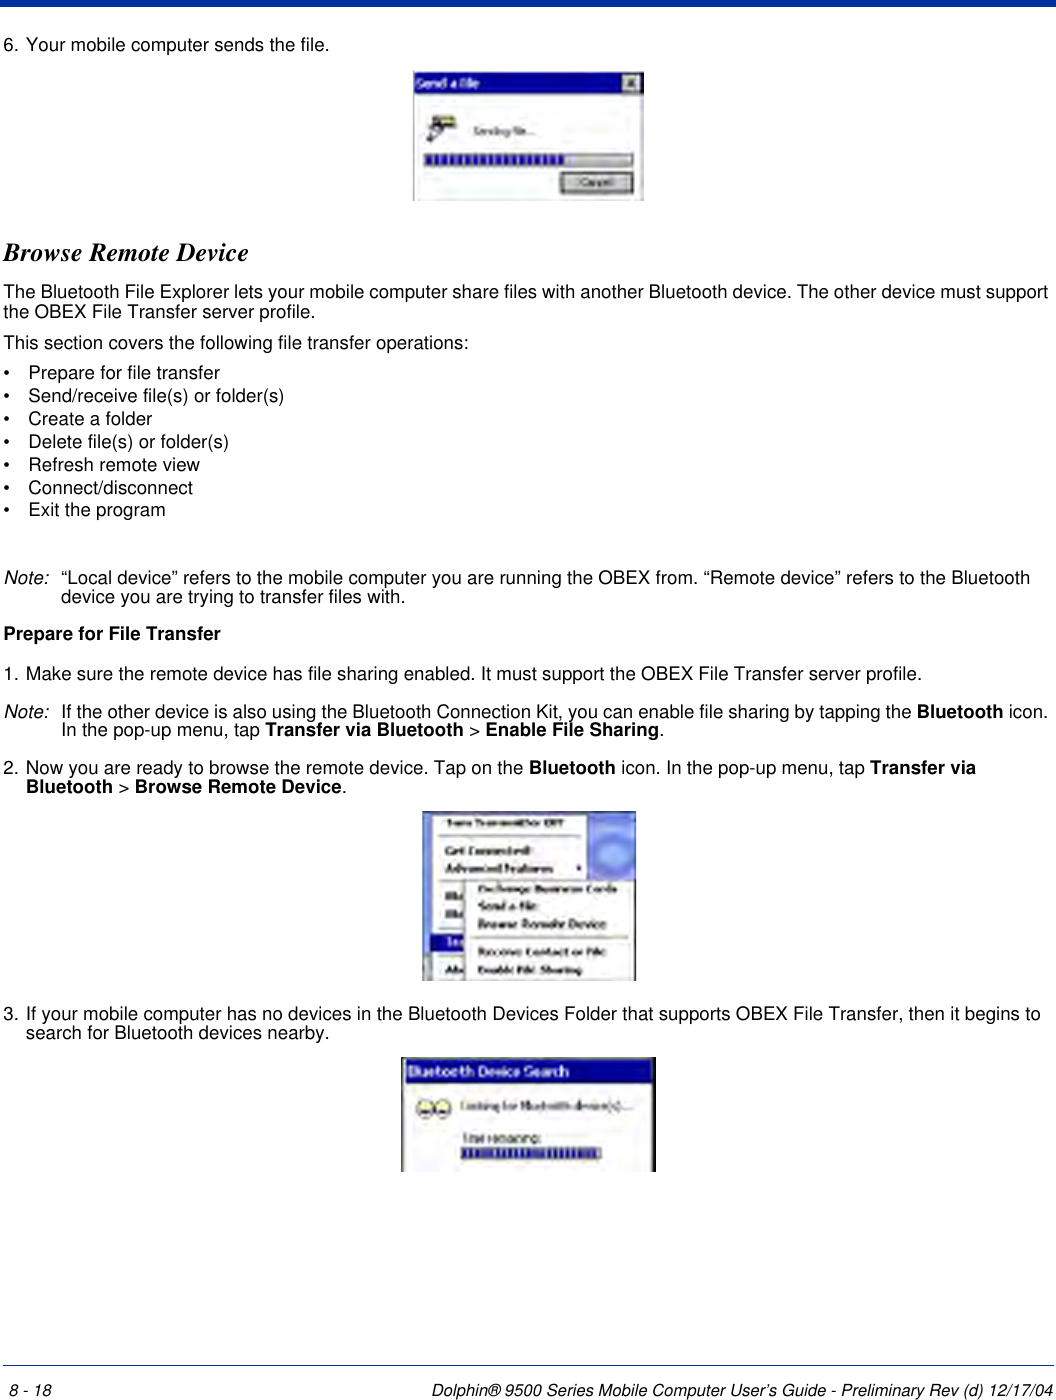 8 - 18 Dolphin® 9500 Series Mobile Computer User’s Guide - Preliminary Rev (d) 12/17/046. Your mobile computer sends the file.Browse Remote DeviceThe Bluetooth File Explorer lets your mobile computer share files with another Bluetooth device. The other device must support the OBEX File Transfer server profile.This section covers the following file transfer operations:•           Prepare for file transfer•           Send/receive file(s) or folder(s)•           Create a folder•           Delete file(s) or folder(s)•           Refresh remote view•           Connect/disconnect•           Exit the programNote: “Local device” refers to the mobile computer you are running the OBEX from. “Remote device” refers to the Bluetooth device you are trying to transfer files with.Prepare for File Transfer1. Make sure the remote device has file sharing enabled. It must support the OBEX File Transfer server profile.Note: If the other device is also using the Bluetooth Connection Kit, you can enable file sharing by tapping the Bluetooth icon. In the pop-up menu, tap Transfer via Bluetooth &gt; Enable File Sharing.2. Now you are ready to browse the remote device. Tap on the Bluetooth icon. In the pop-up menu, tap Transfer via Bluetooth &gt; Browse Remote Device.3. If your mobile computer has no devices in the Bluetooth Devices Folder that supports OBEX File Transfer, then it begins to search for Bluetooth devices nearby.